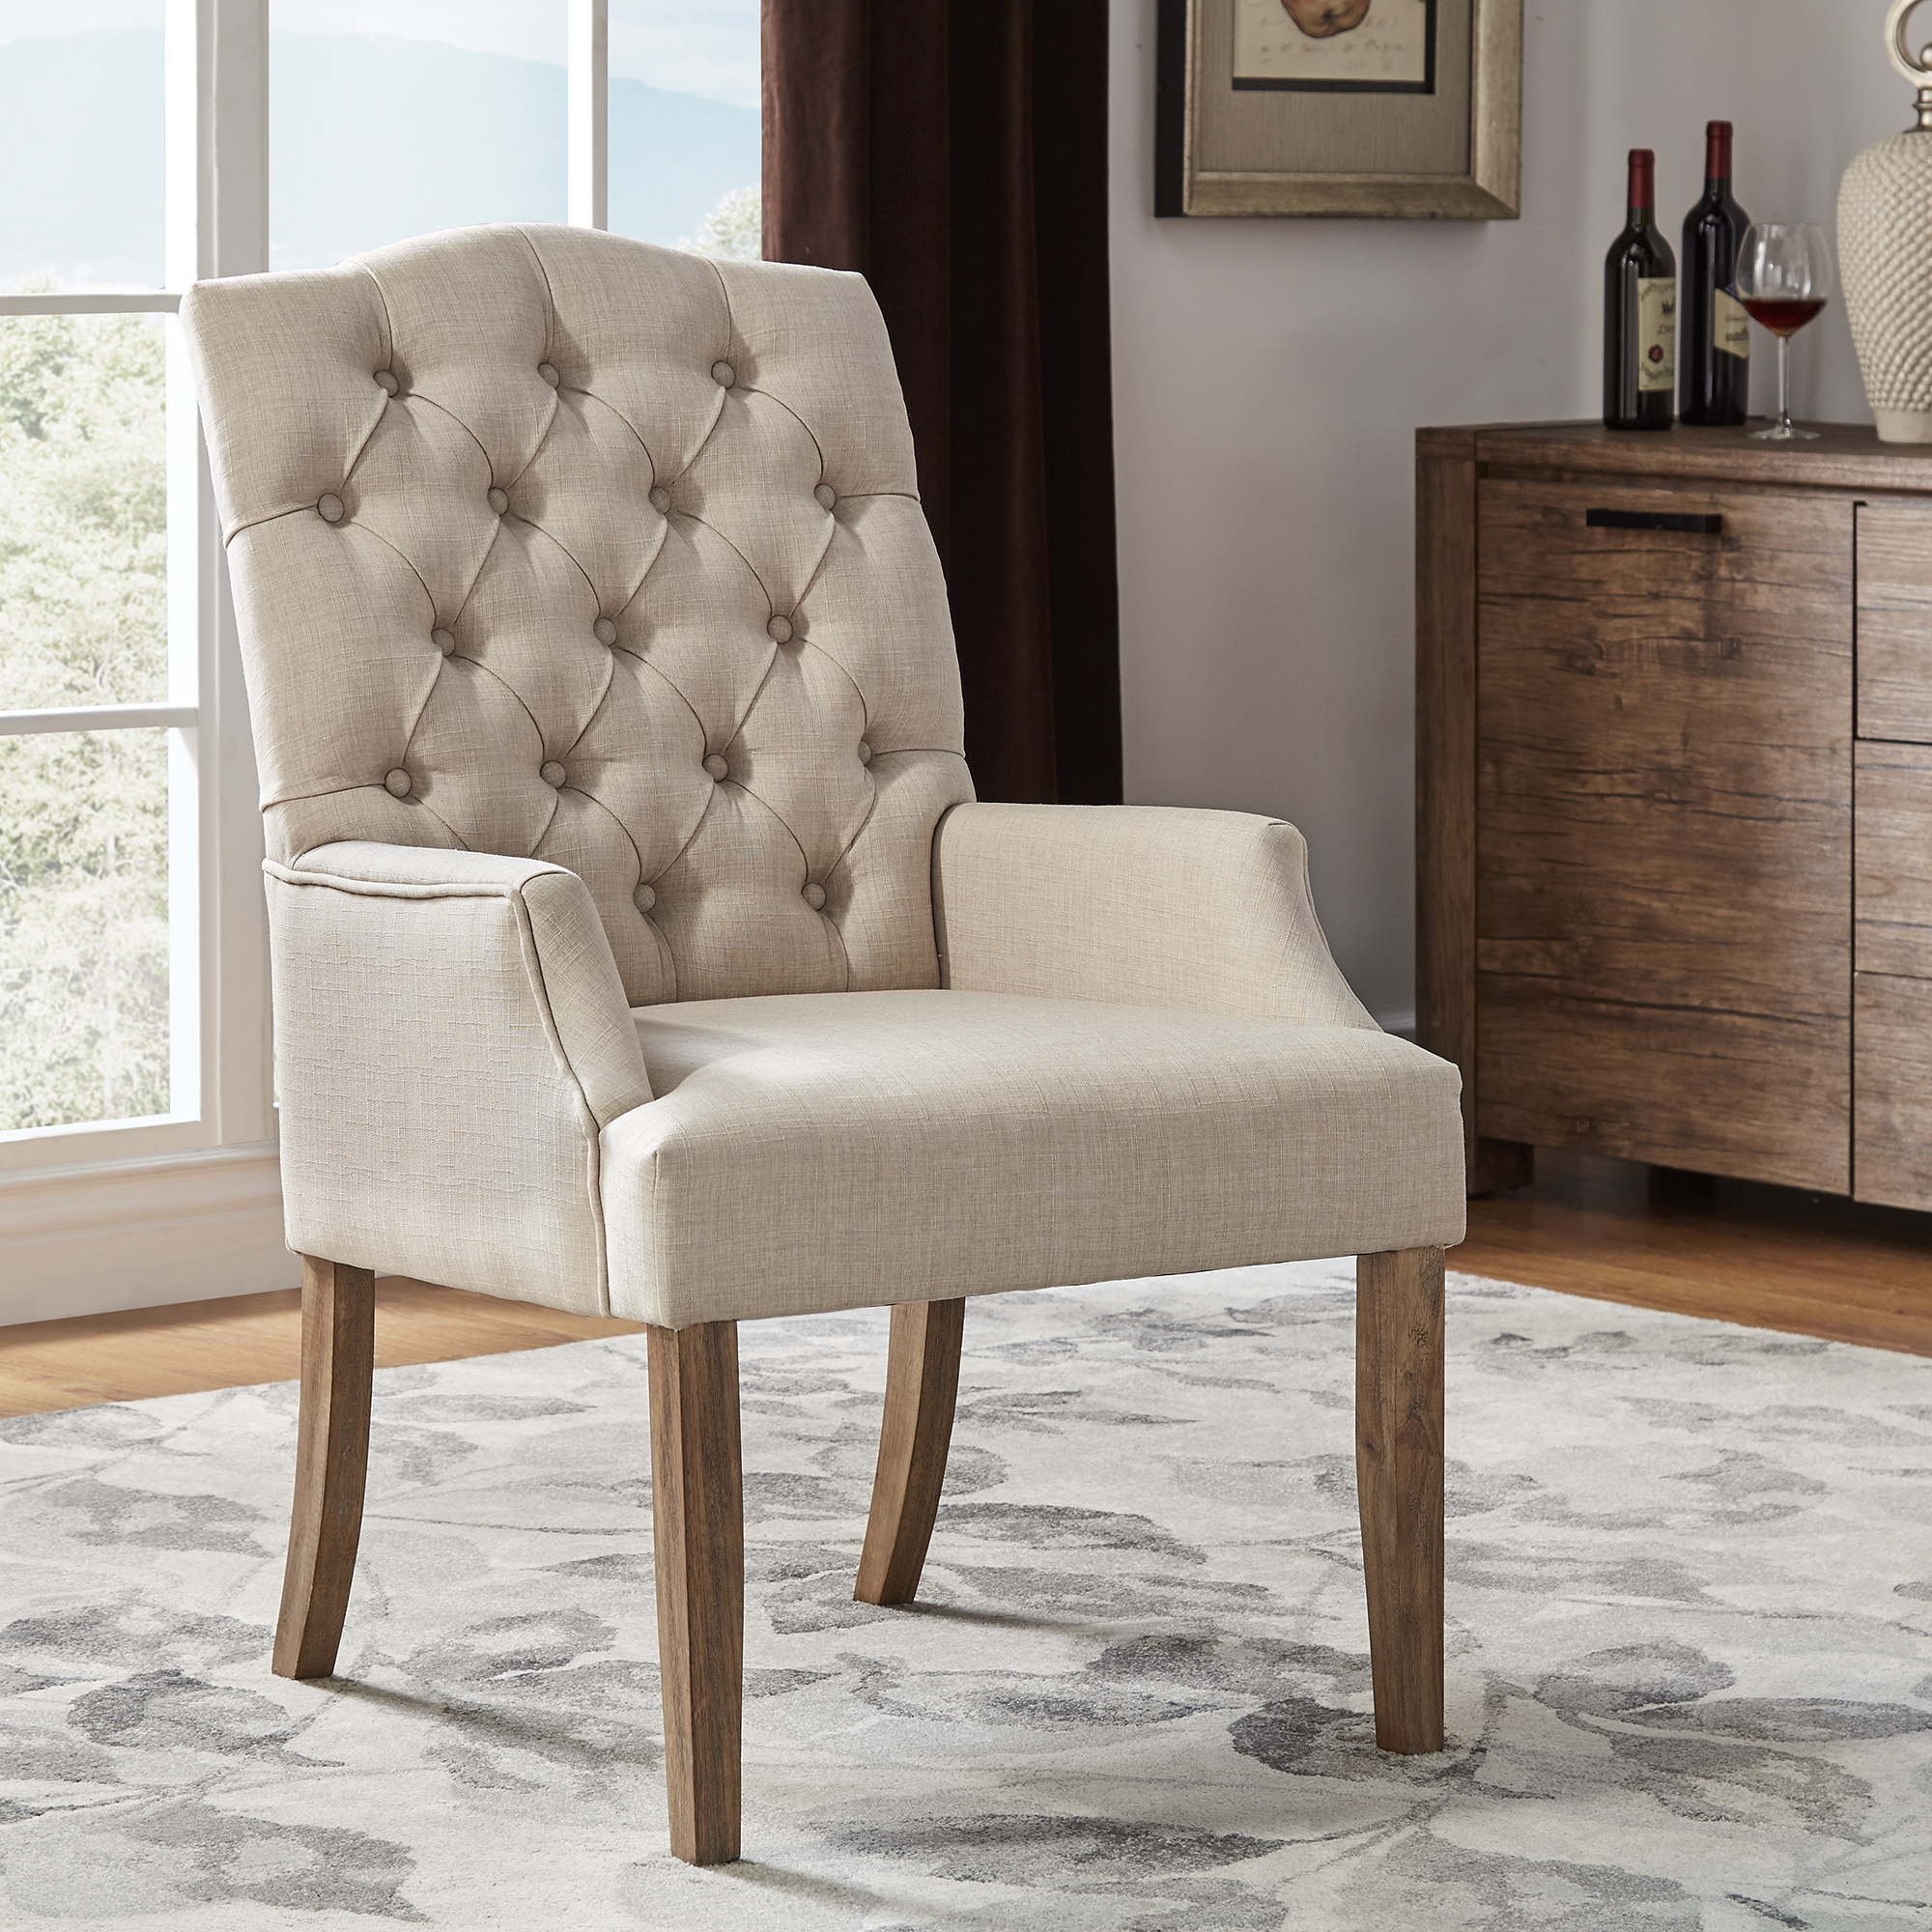 Light Distressed Natural Finish Linen Tufted Dining Chair